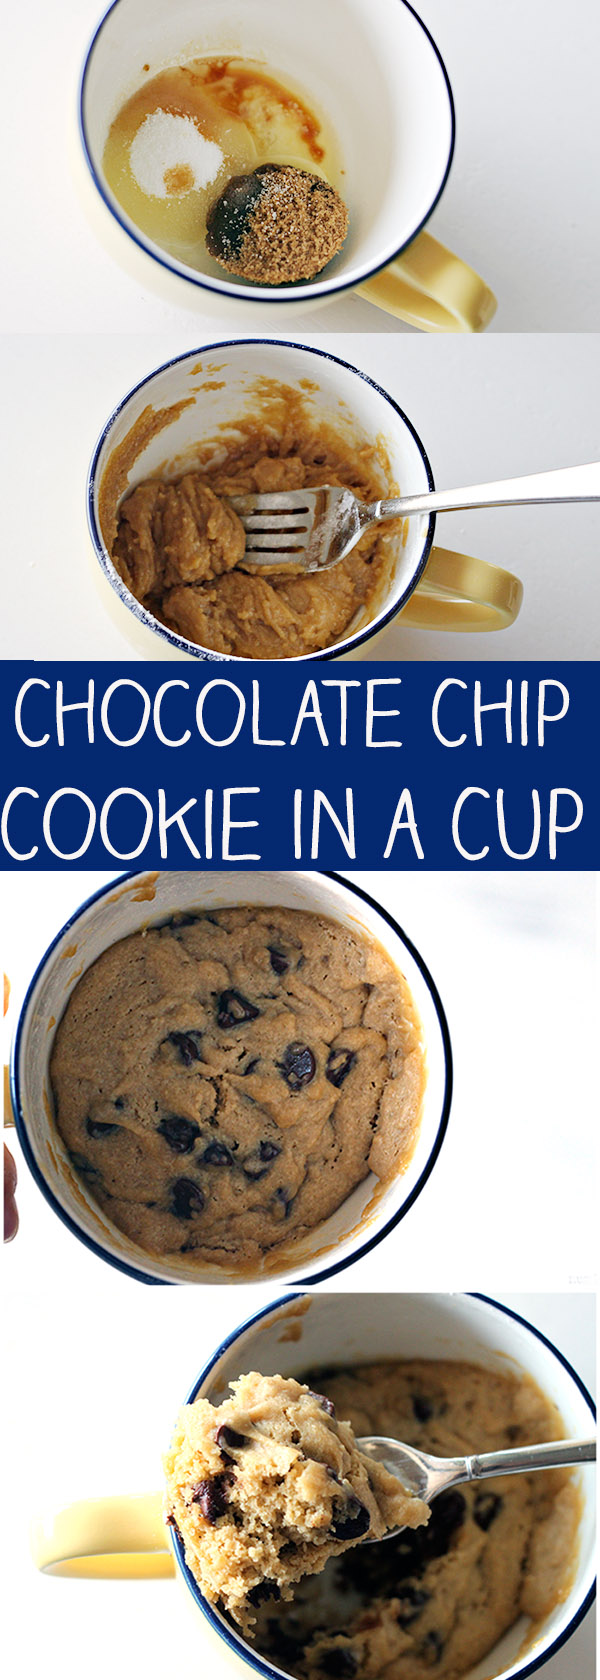 Chocolate Chip Cookie In A Cup No 2 Pencil